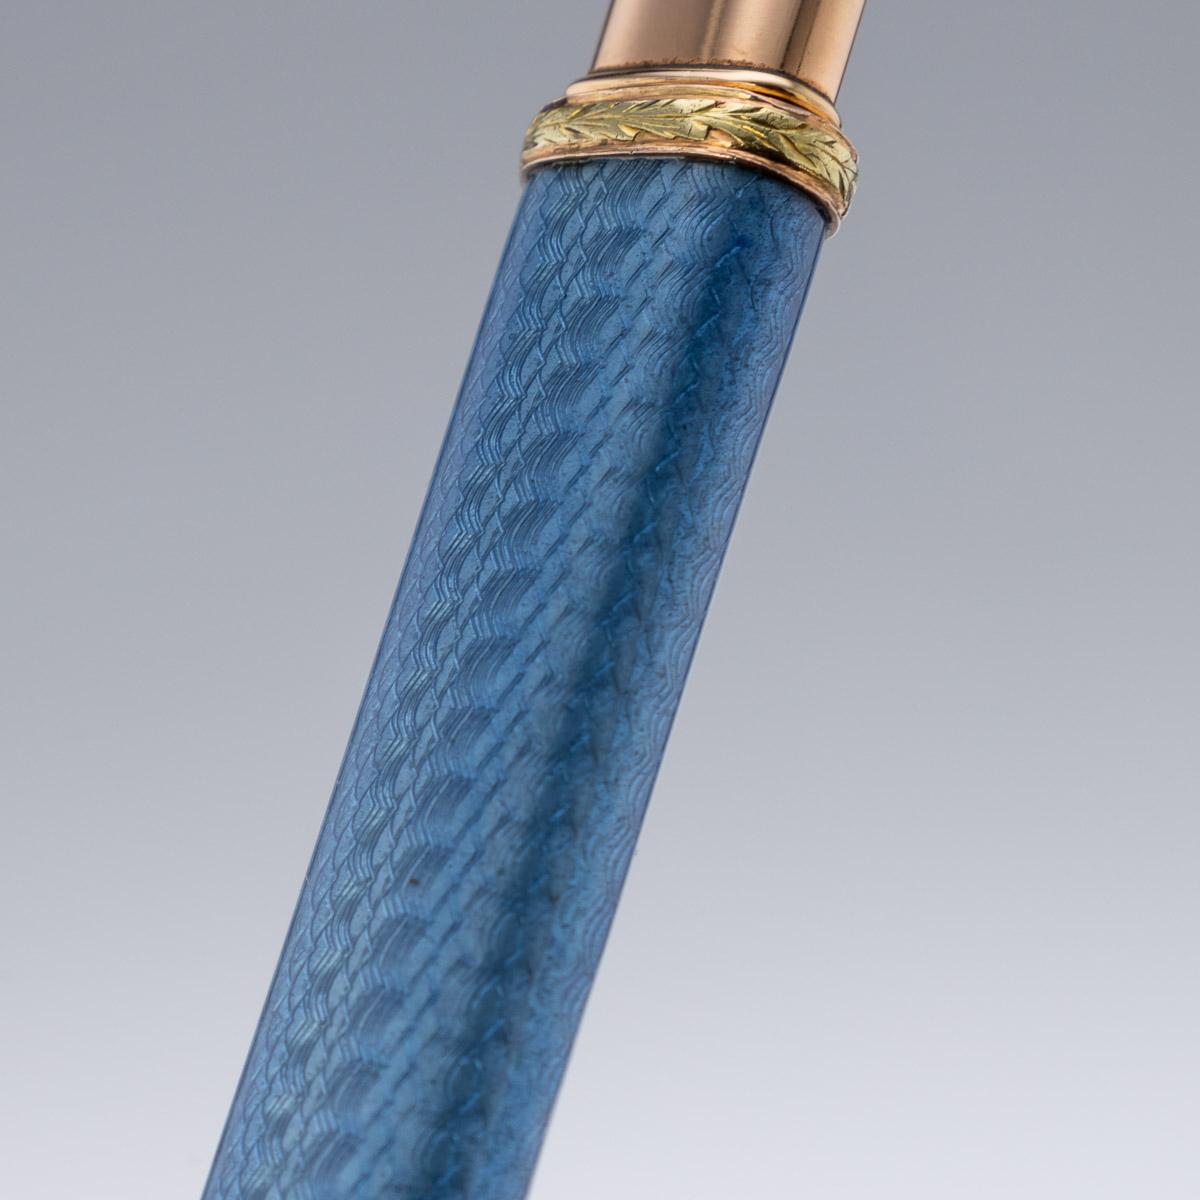 20th Century Russian Faberge Two-Colour Gold-Mounted Enamel Pencil, Adler C.1910 1